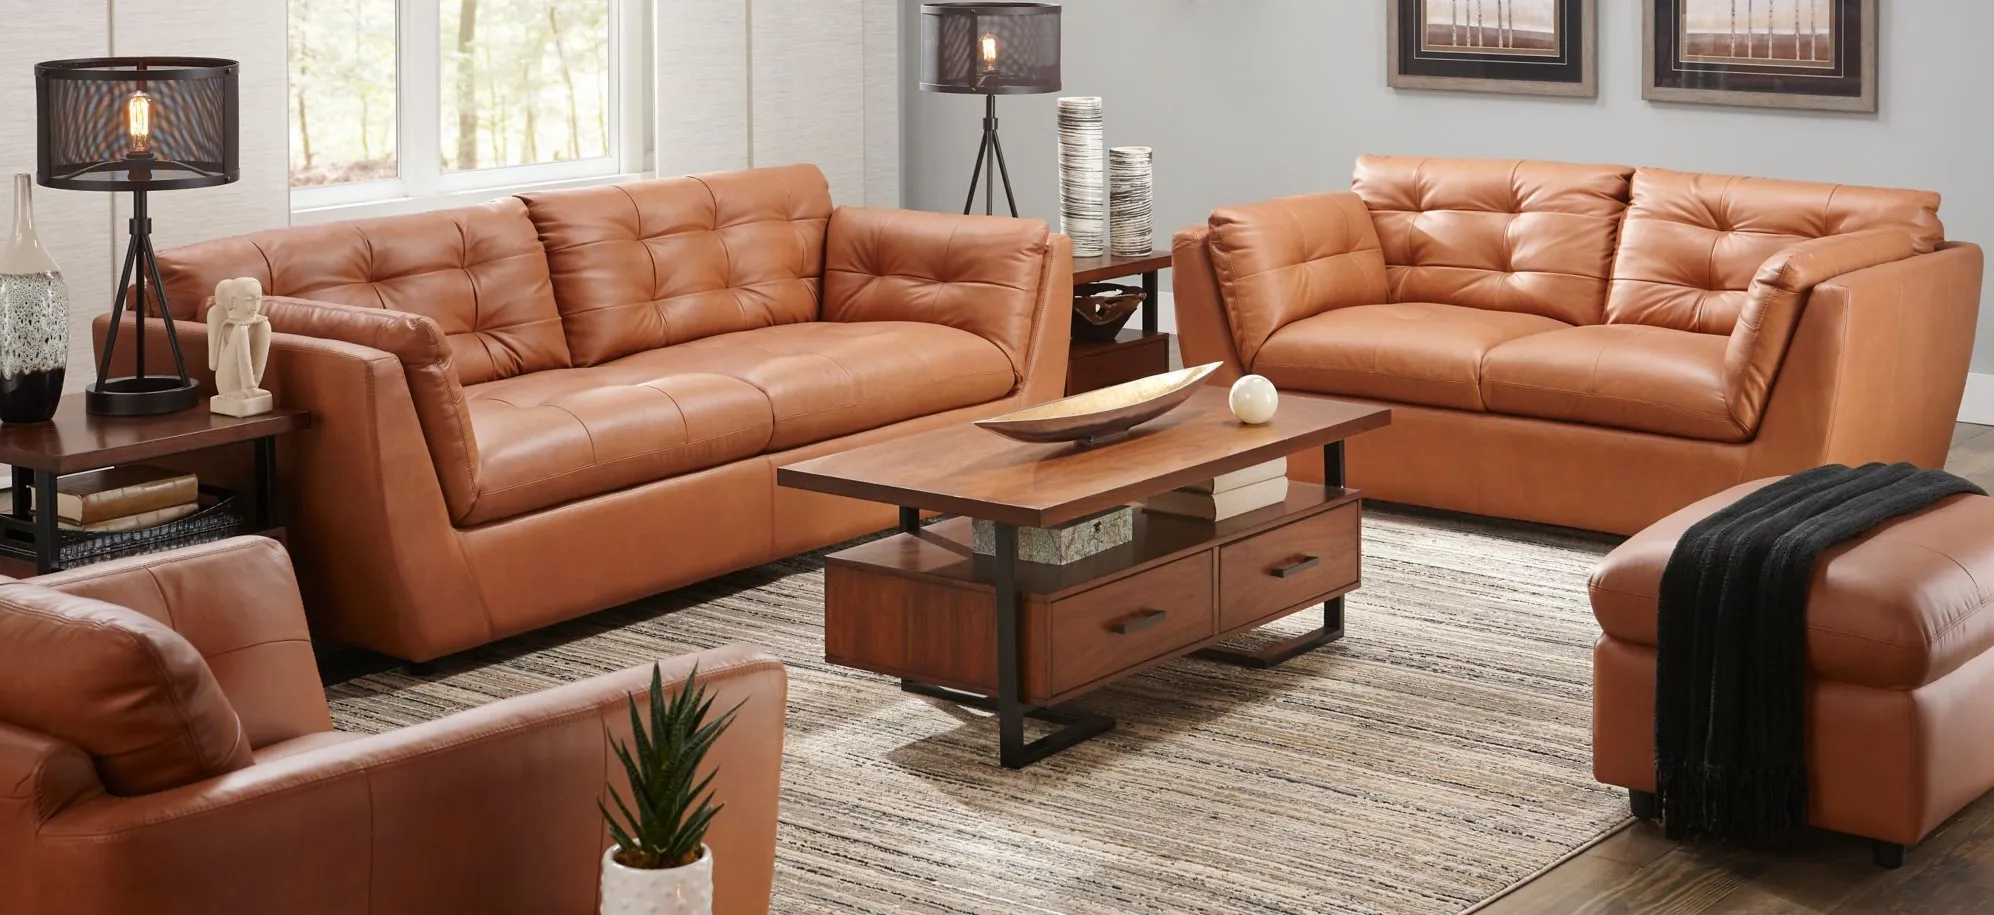 Damar 2-pc.. Leather Sofa and Loveseat Set in Brown by Chateau D'Ax